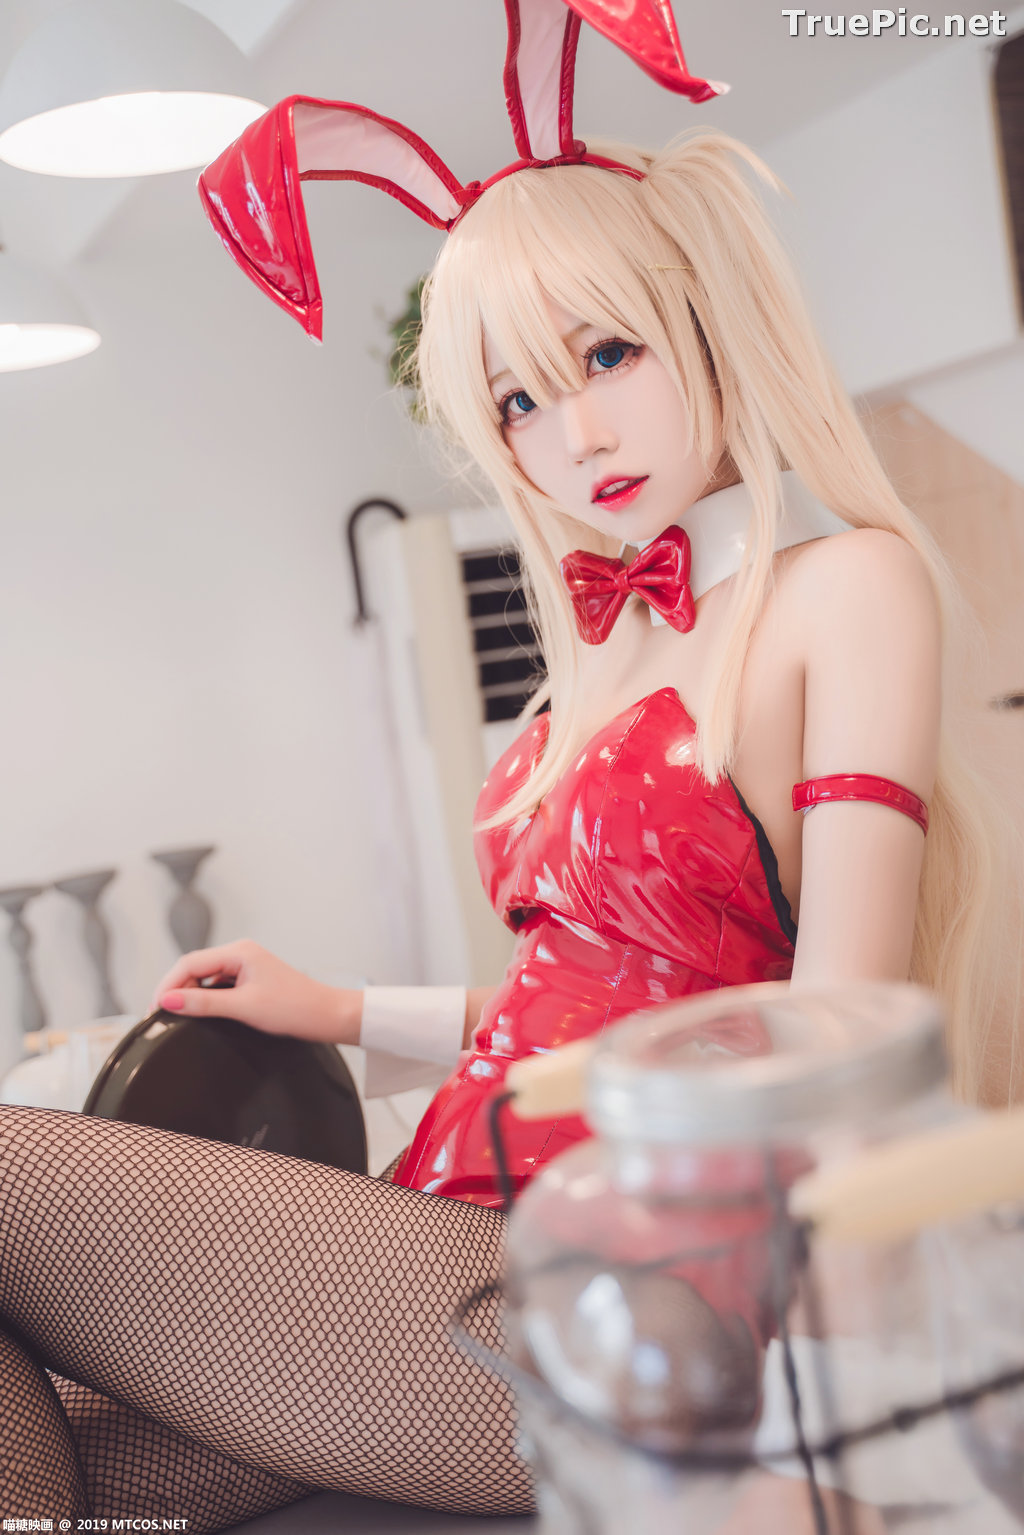 Image [MTCos] 喵糖映画 Vol.021 – Chinese Cute Model – Red Bunny Girl Cosplay - TruePic.net - Picture-12